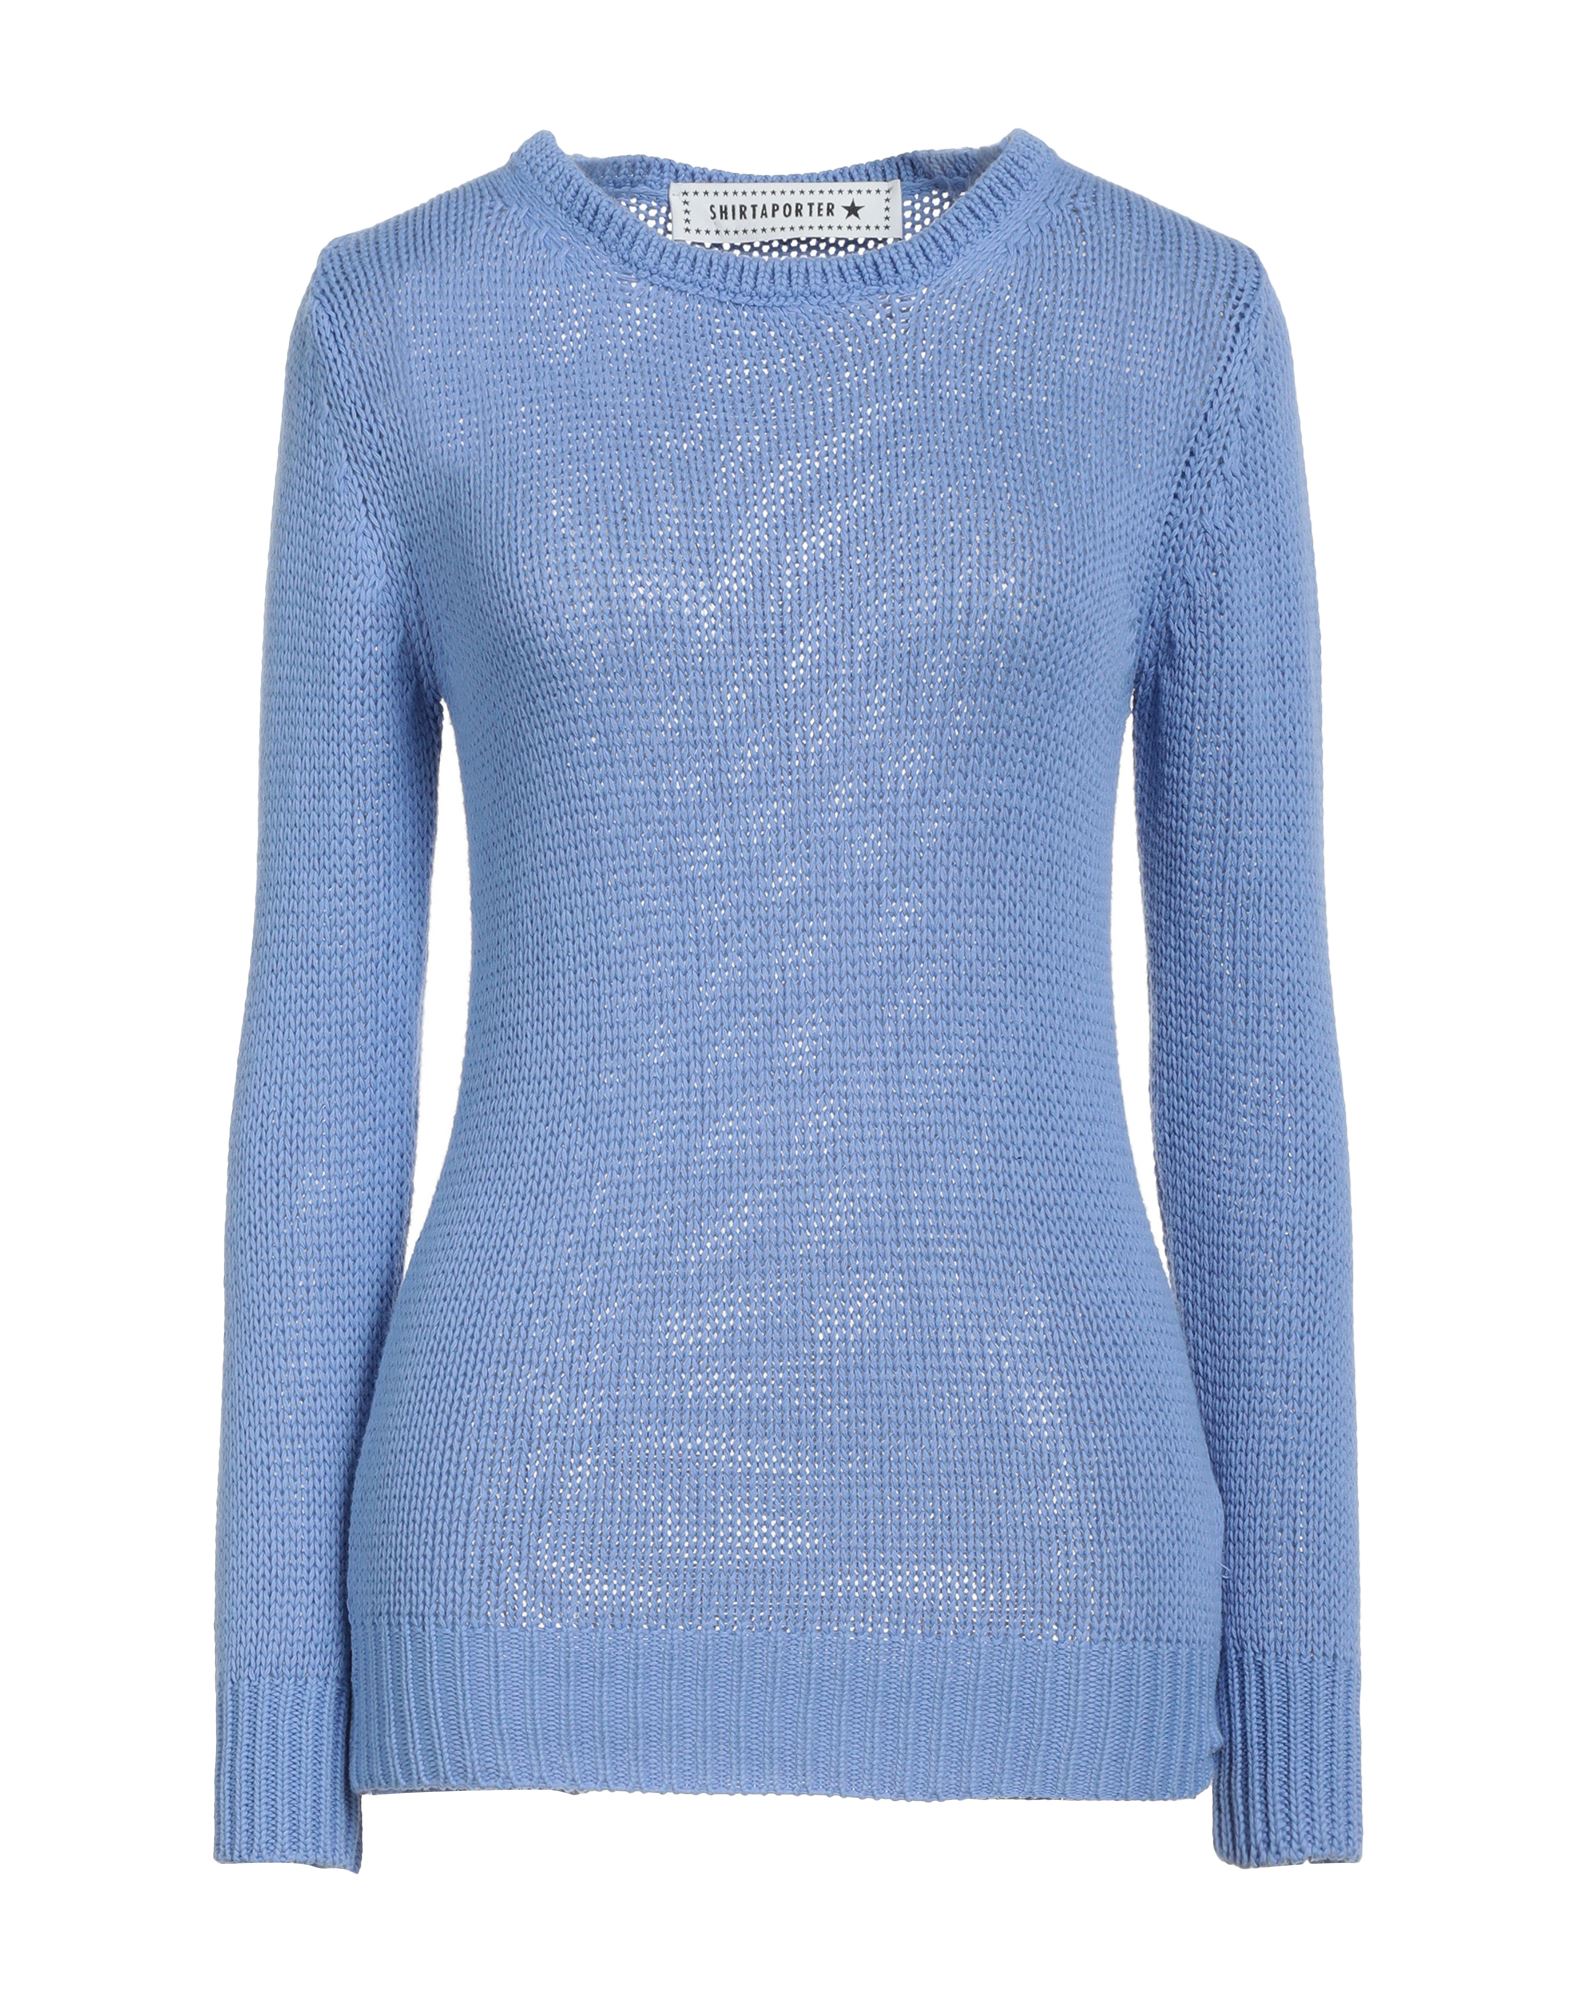 Shirtaporter Sweaters In Blue